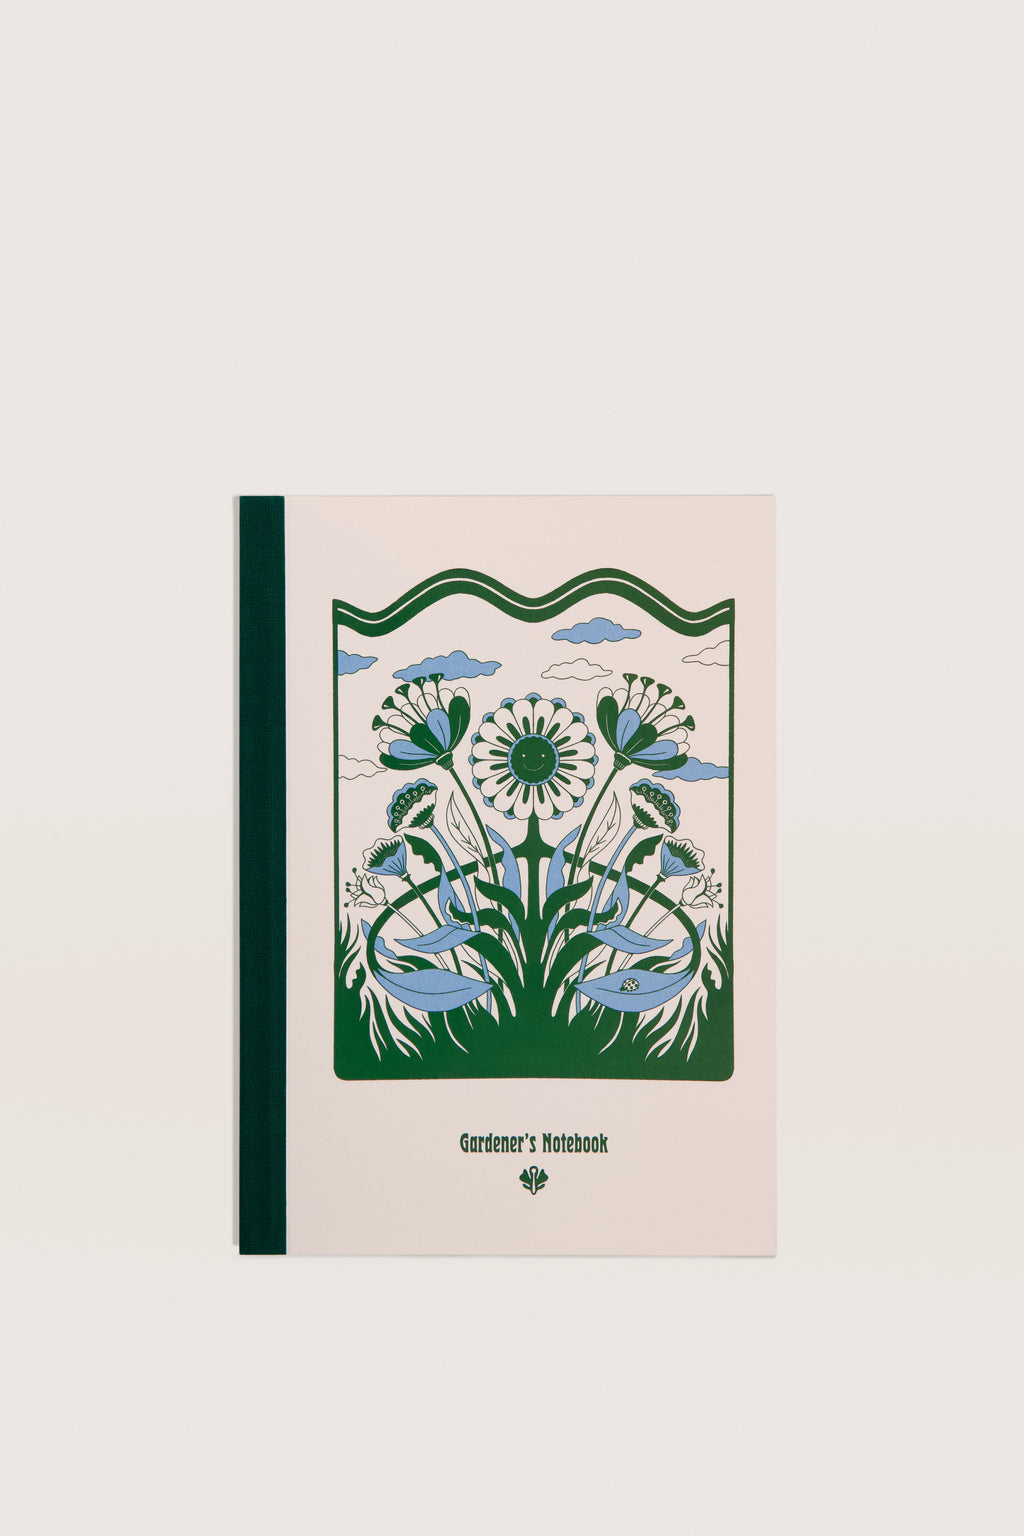 Sowvital A5 size notebook with flowers blooming theme.